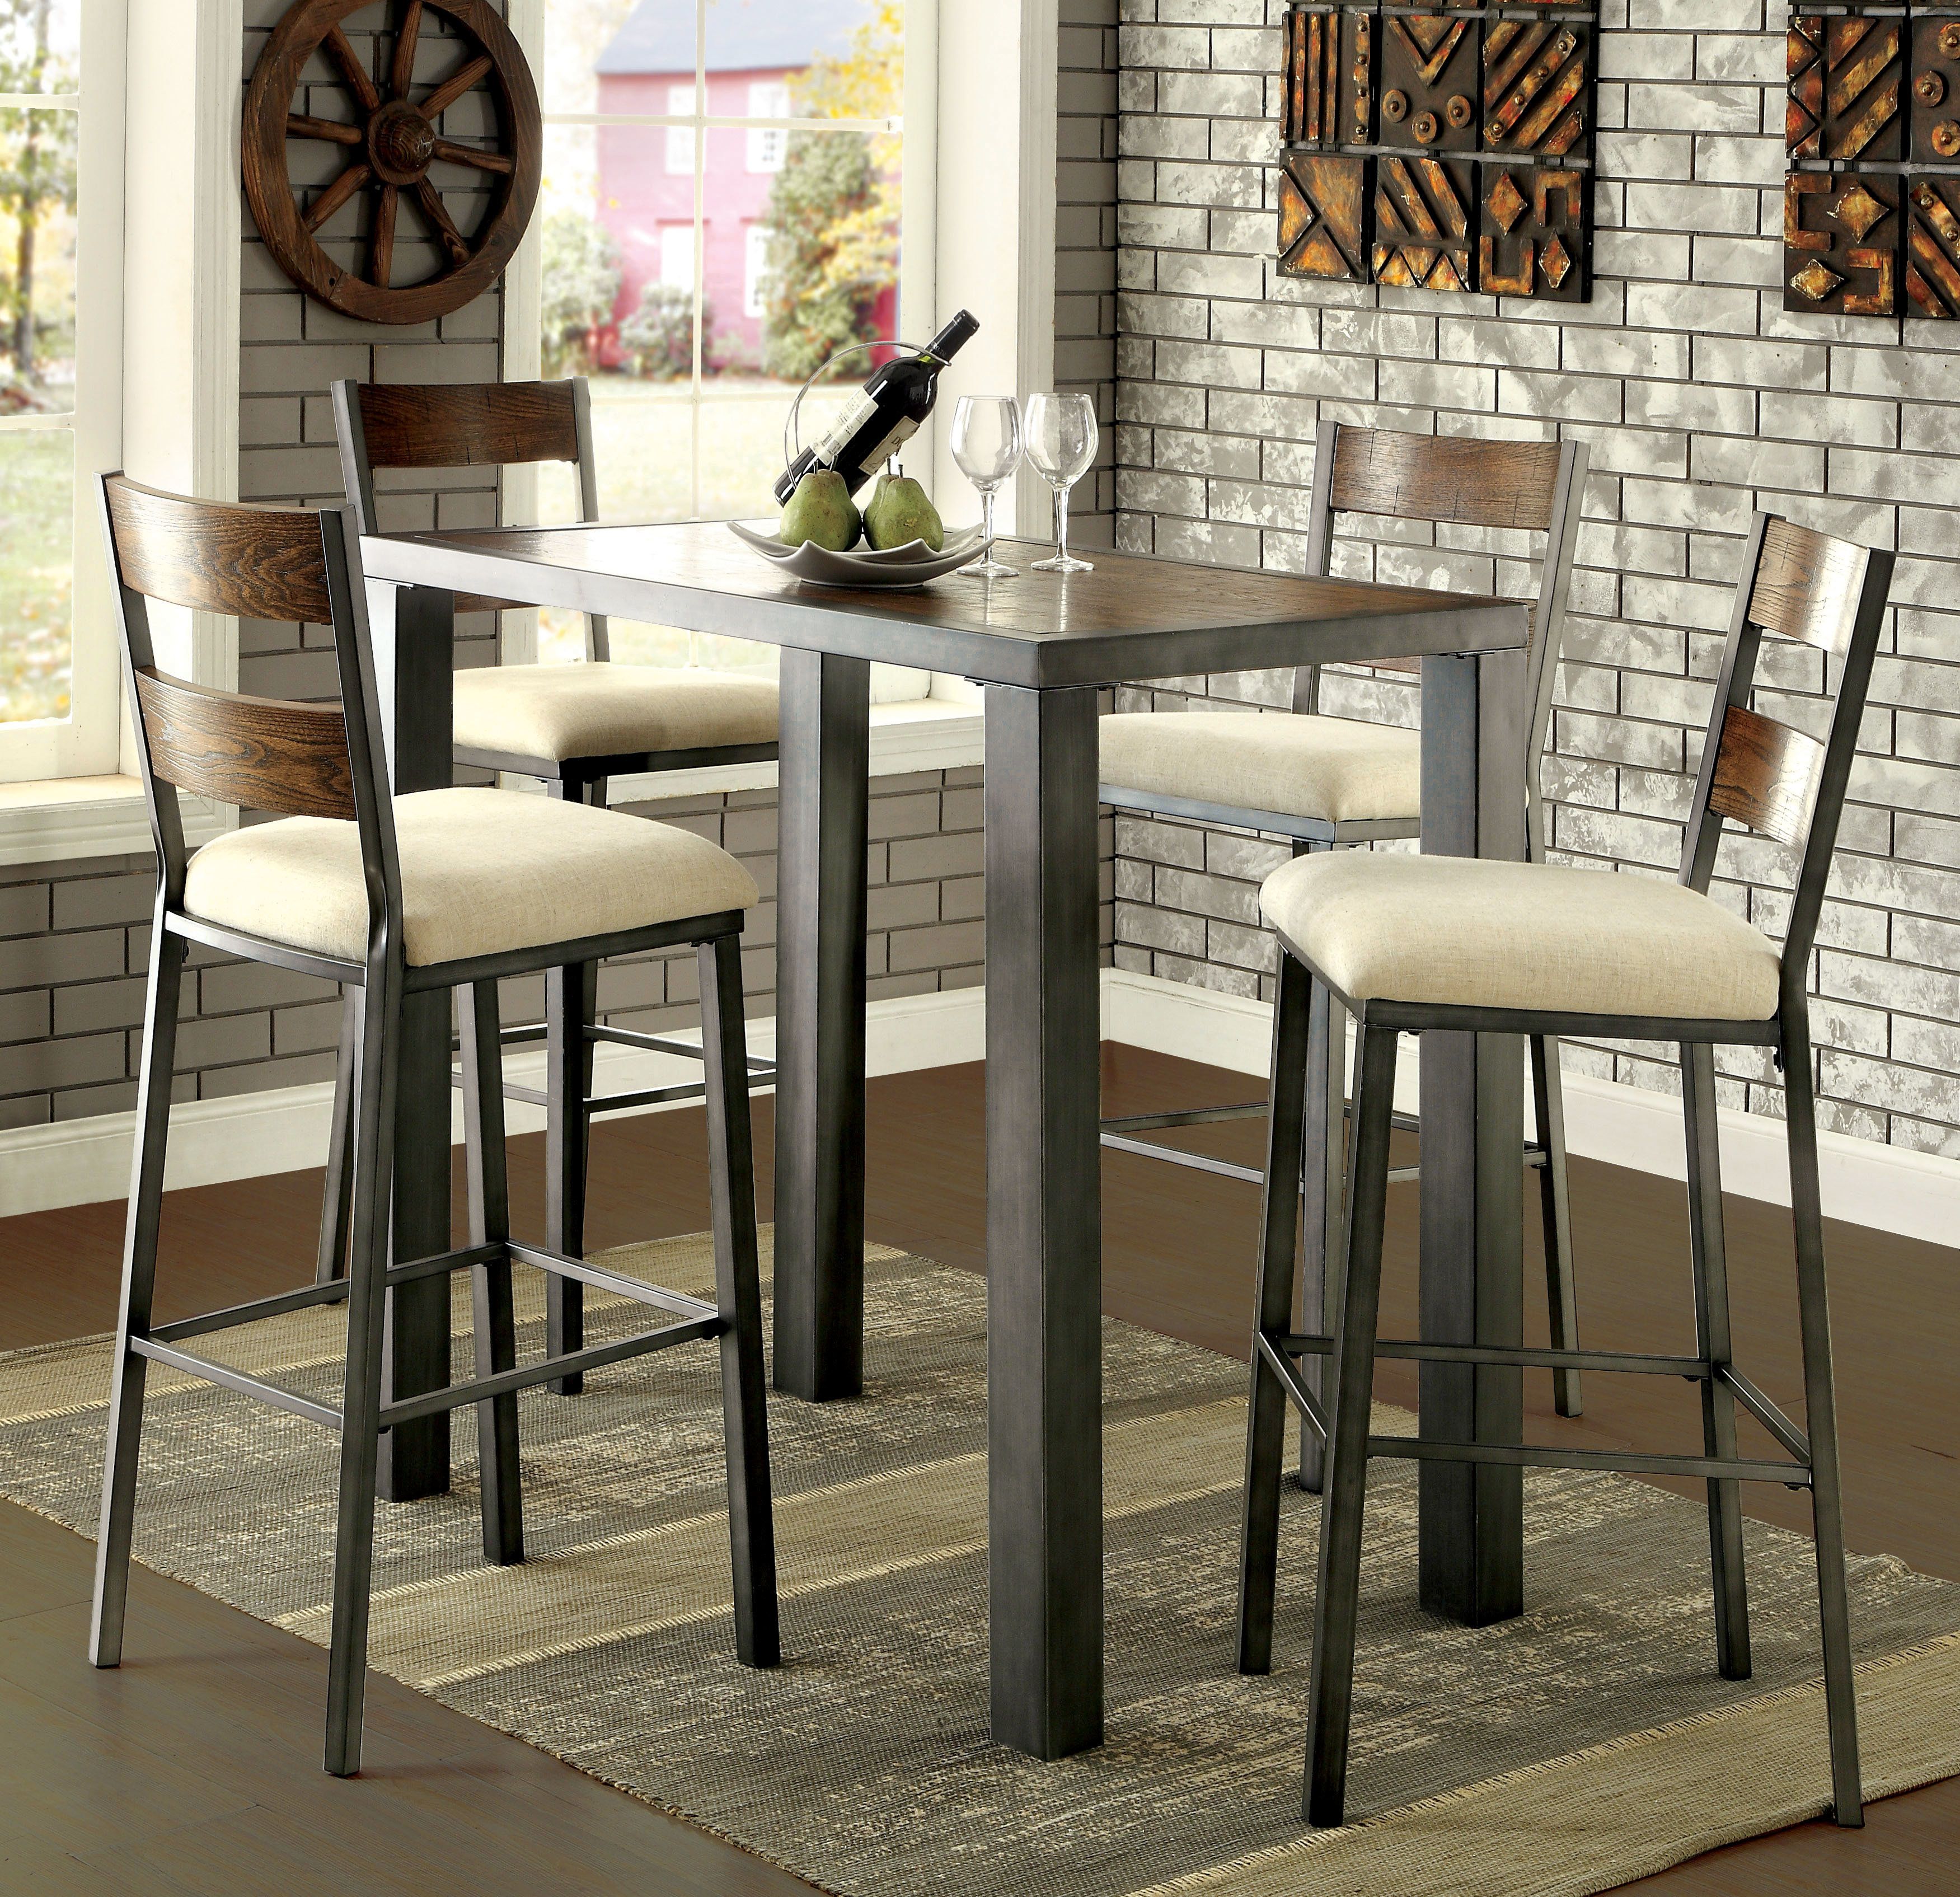 Thurman 5 Piece Pub Table Set Inside Current Bettencourt 3 Piece Counter Height Dining Sets (View 20 of 20)